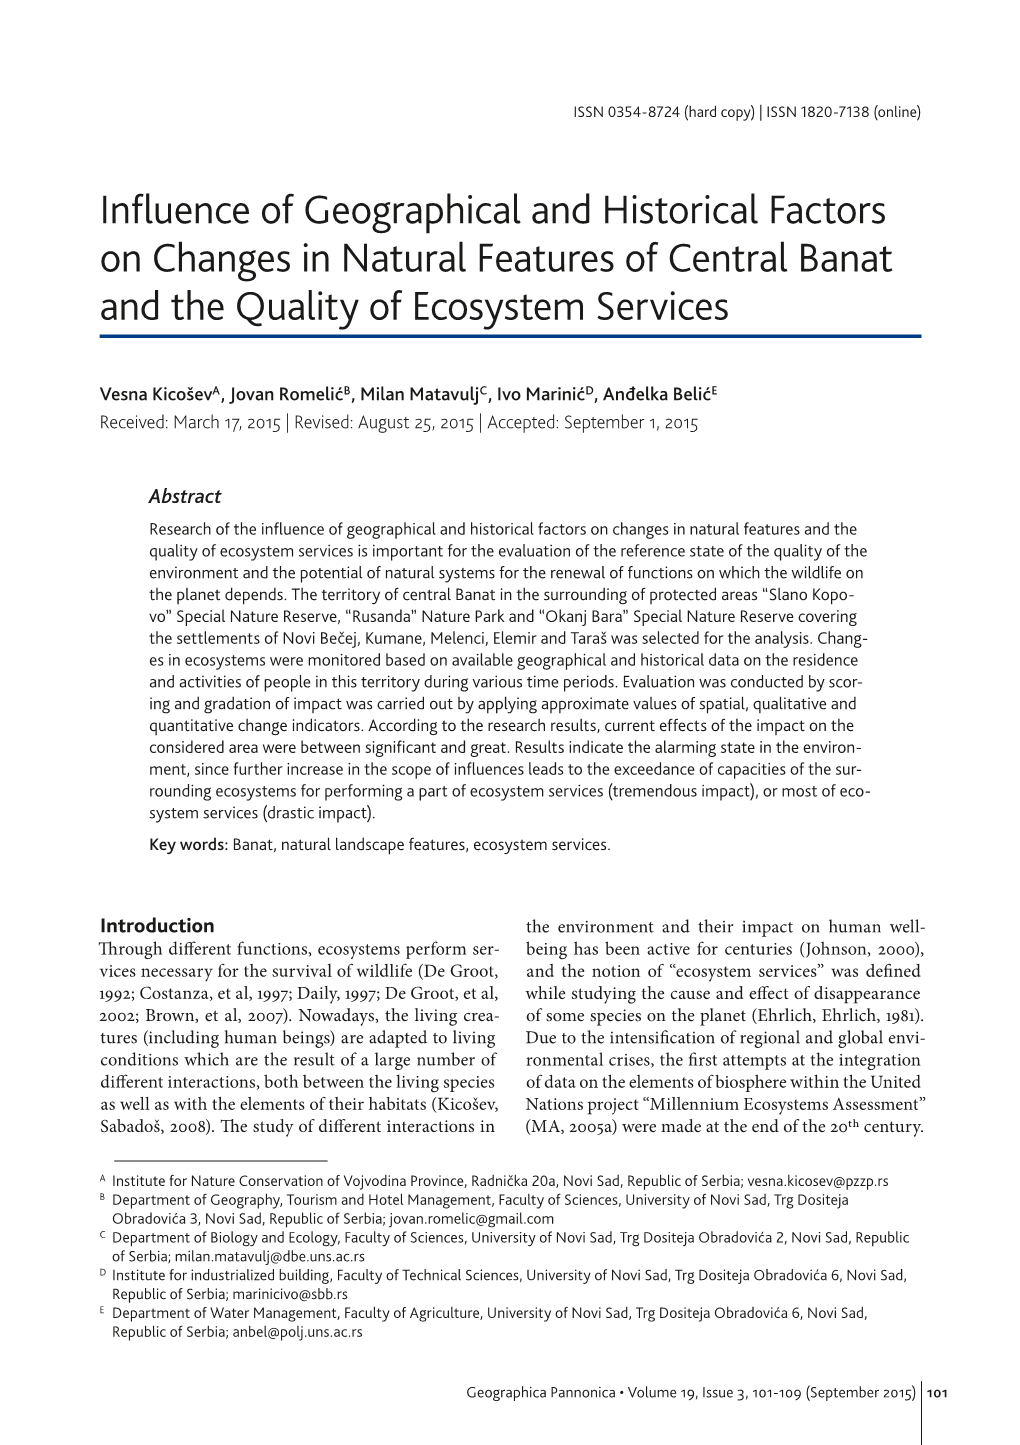 Influence of Geographical and Historical Factors on Changes in Natural Features of Central Banat and the Quality of Ecosystem Services